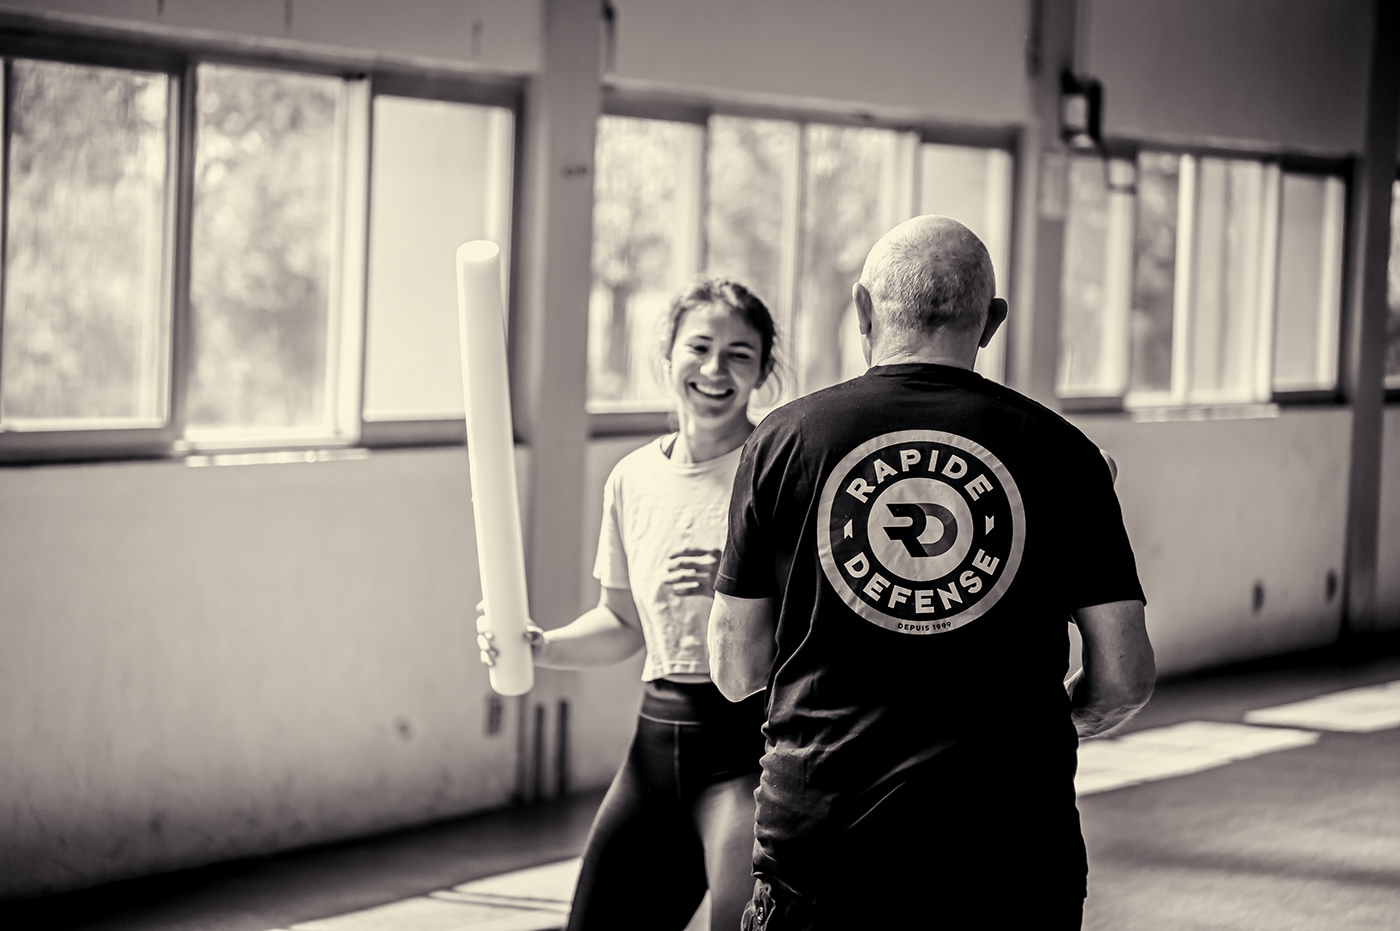 alsace Association Boxing course fight Photography  self defense sport sports strasbourg